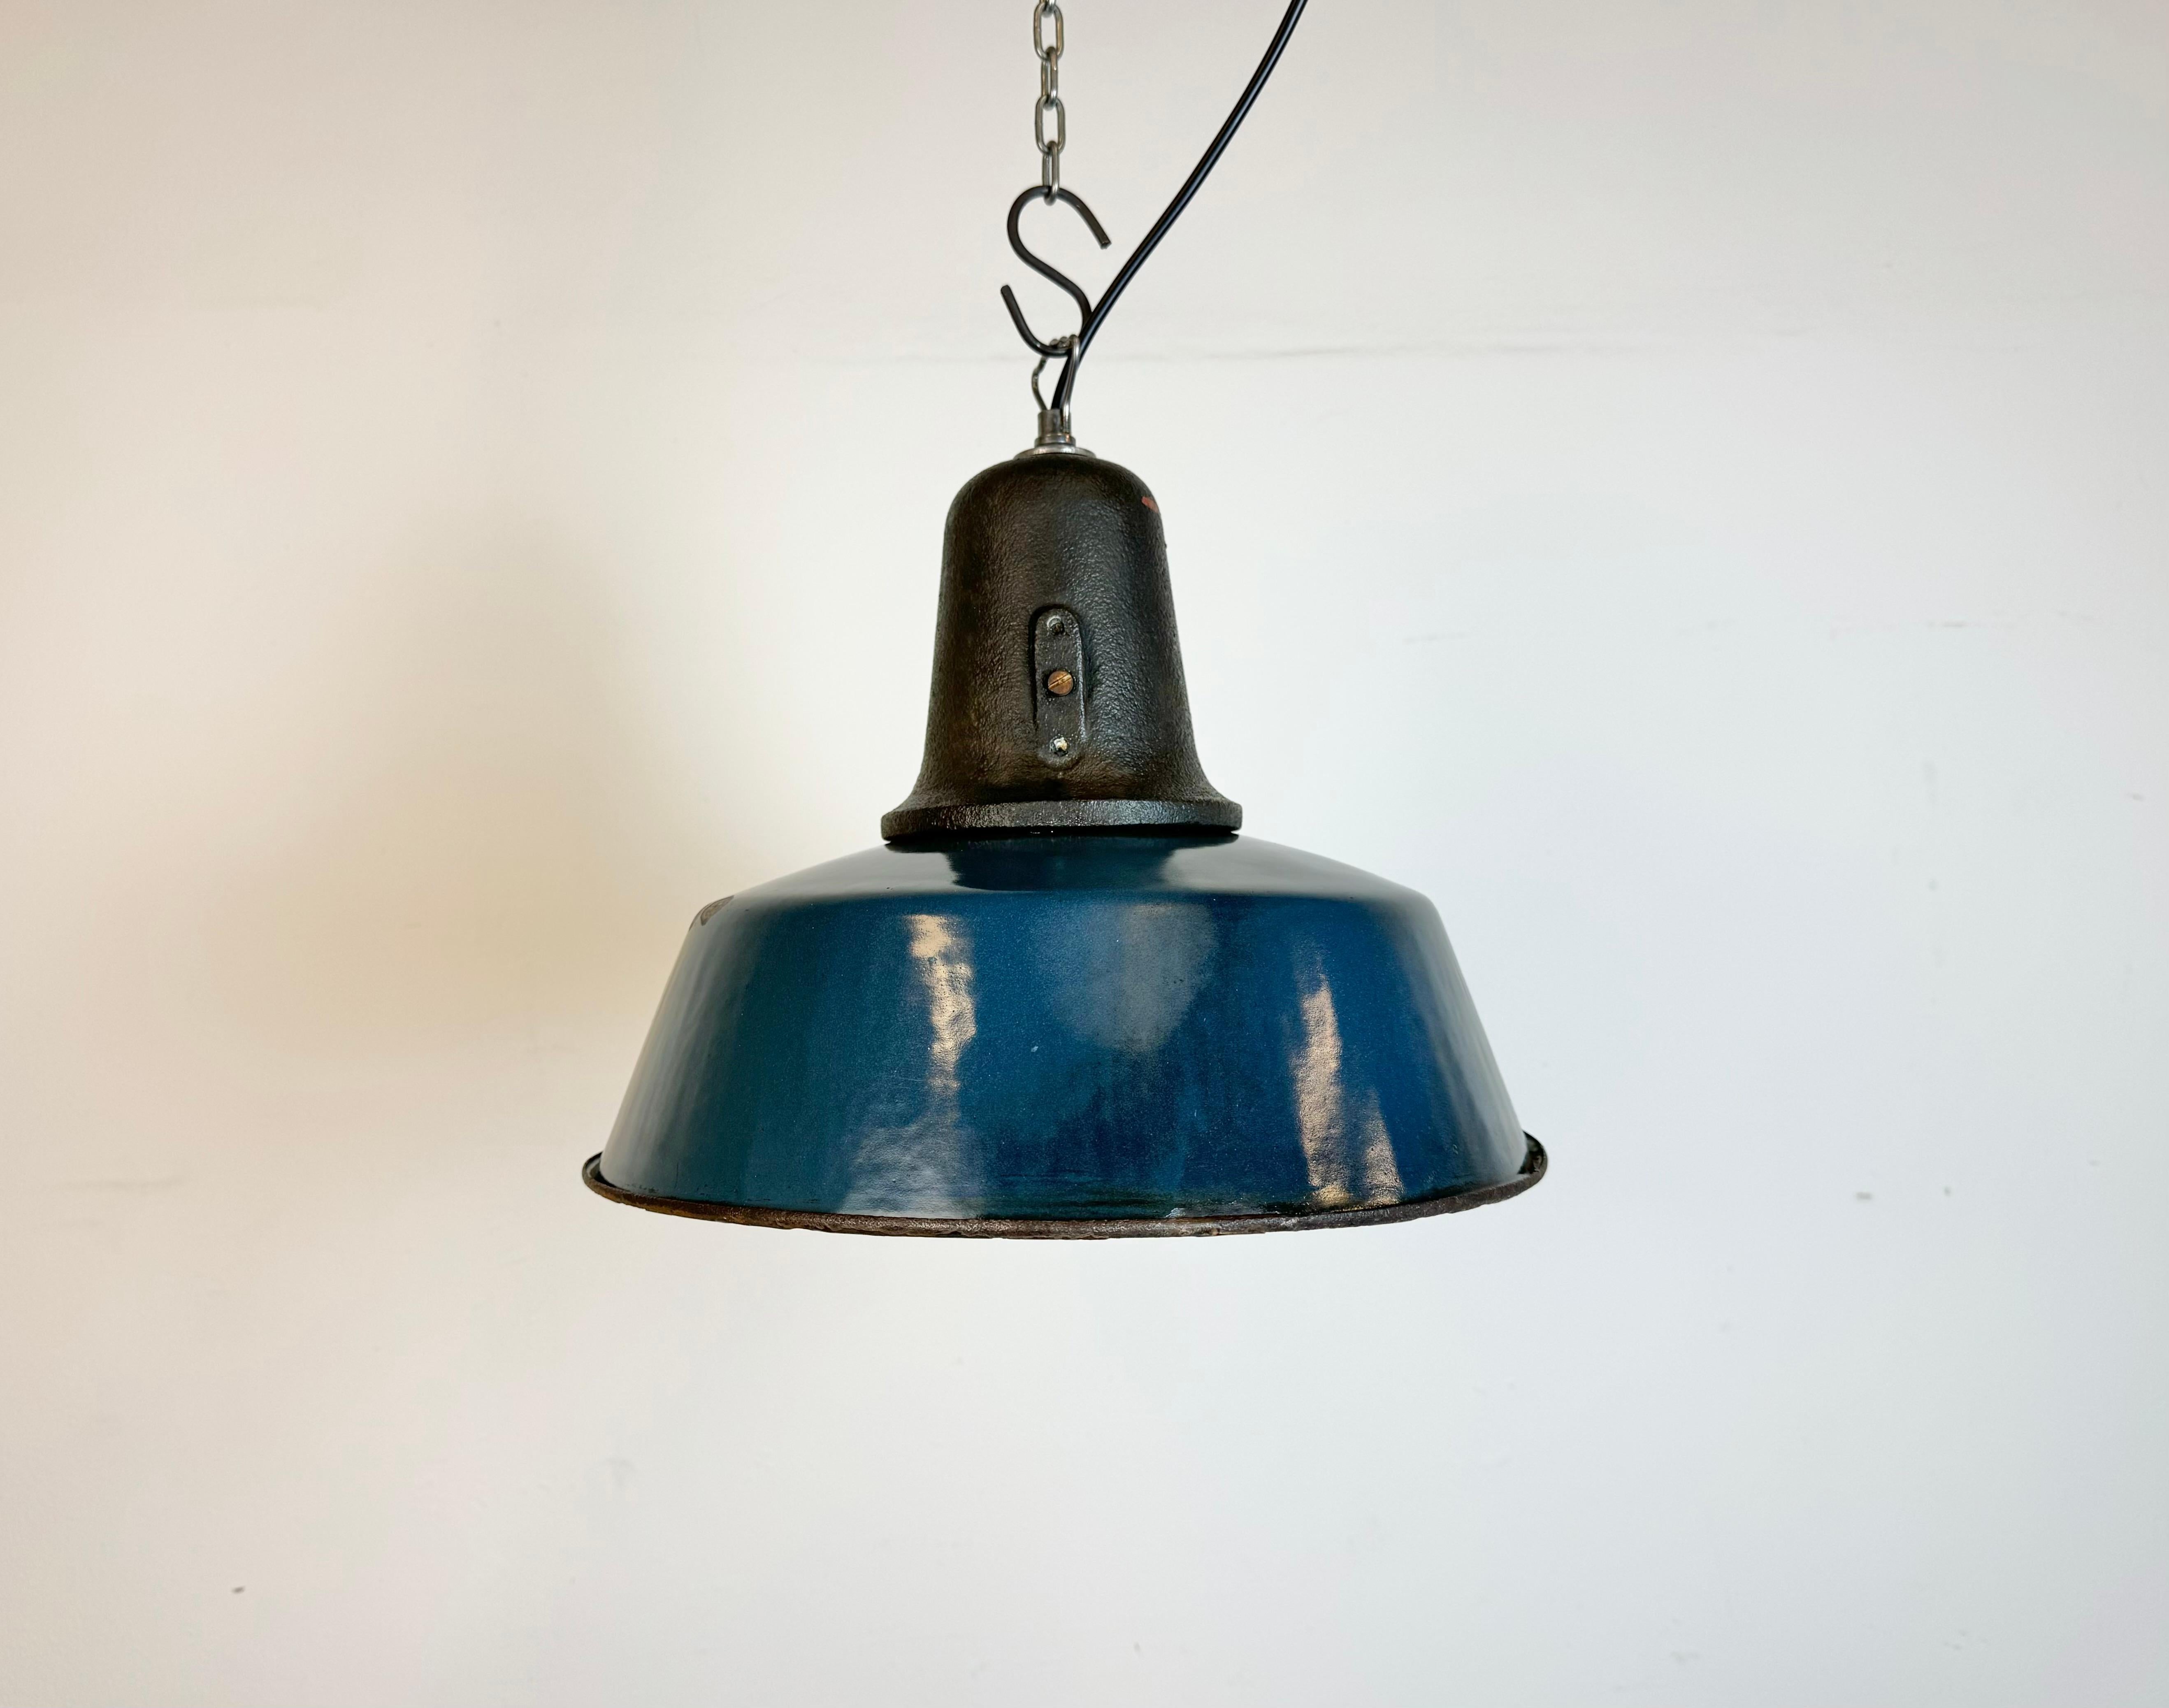 Industrial blue enamel pendant light made in Poland during the 1960s. White enamel inside the shade. Cast iron top. The porcelain socket requires standard E 27/ E 26 light bulbs. New wire. The weight of the lamp is 2,3 kg. The diameter of the shade